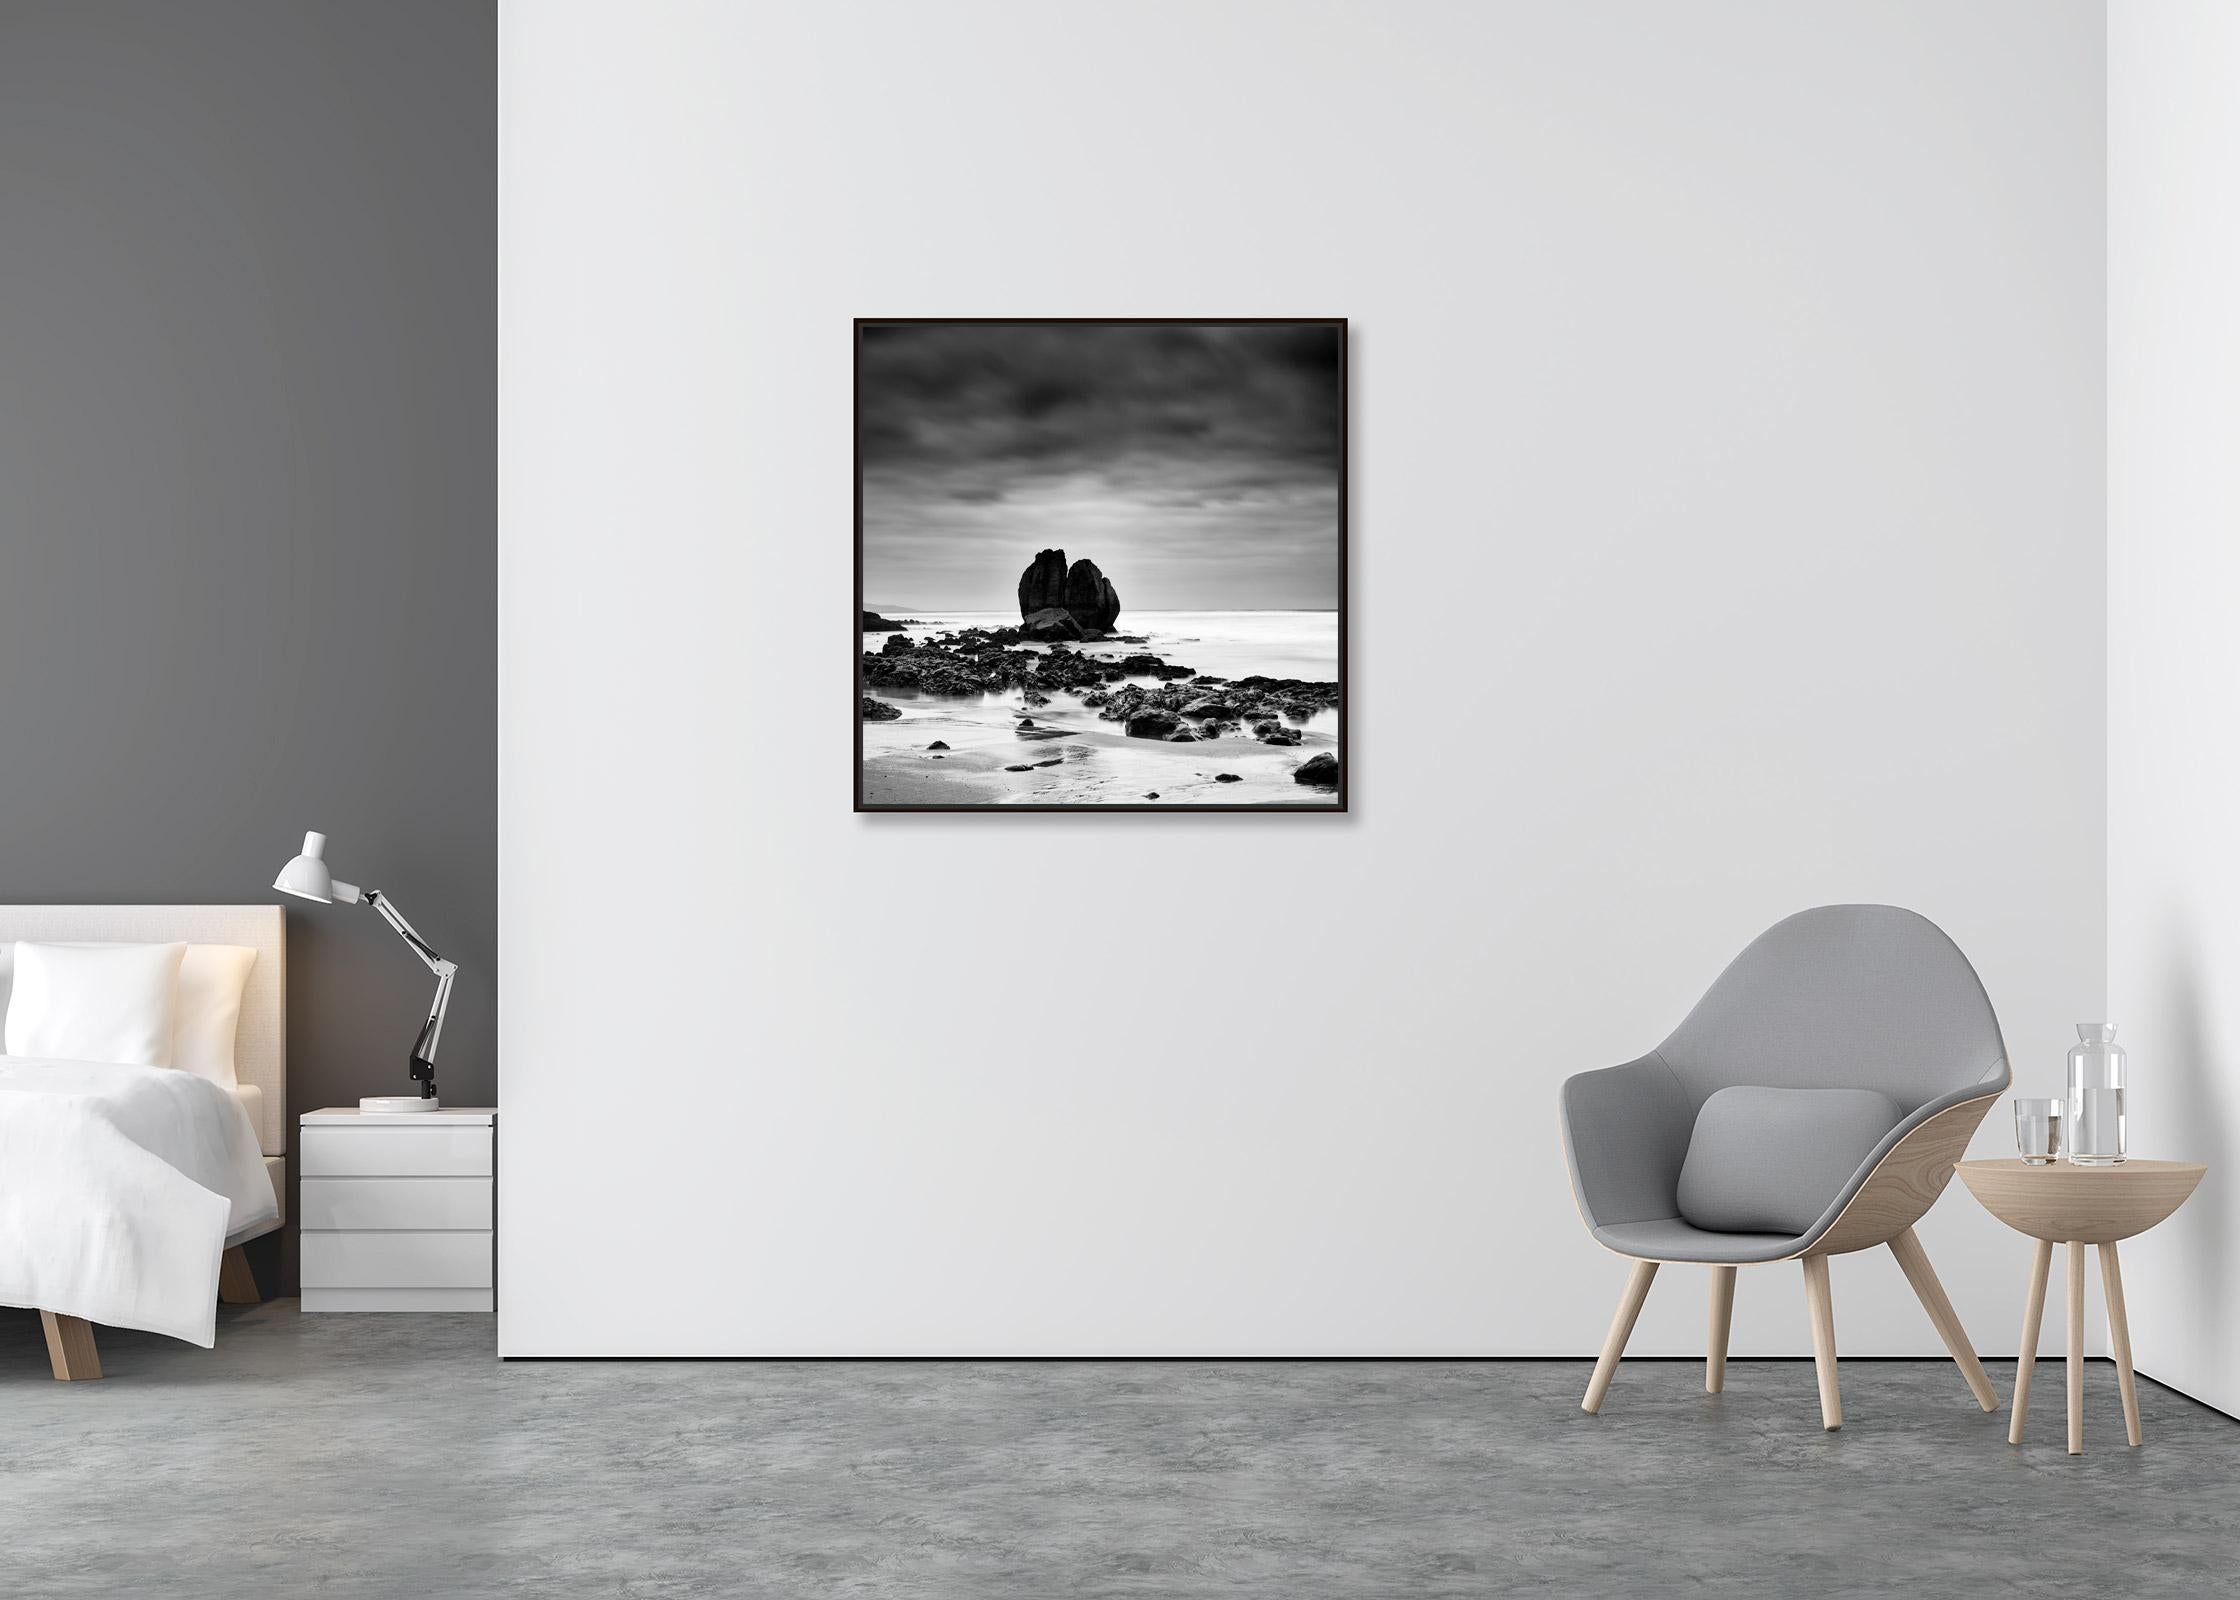 Rocks on the Shore, sandy beach, black and white fine art photography, landscape - Contemporary Photograph by Gerald Berghammer